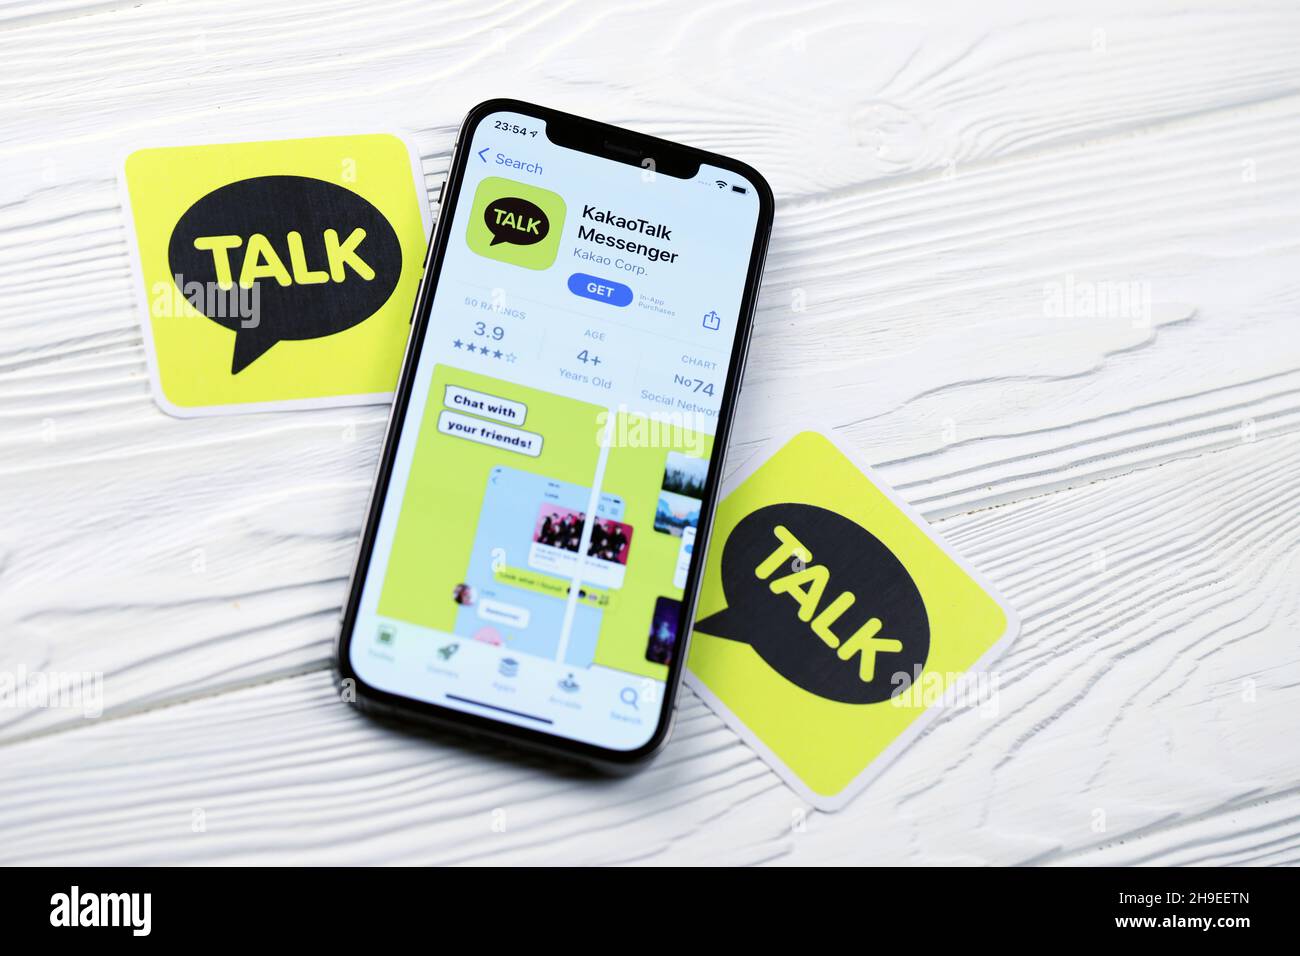 where does kakaotalk store chats android